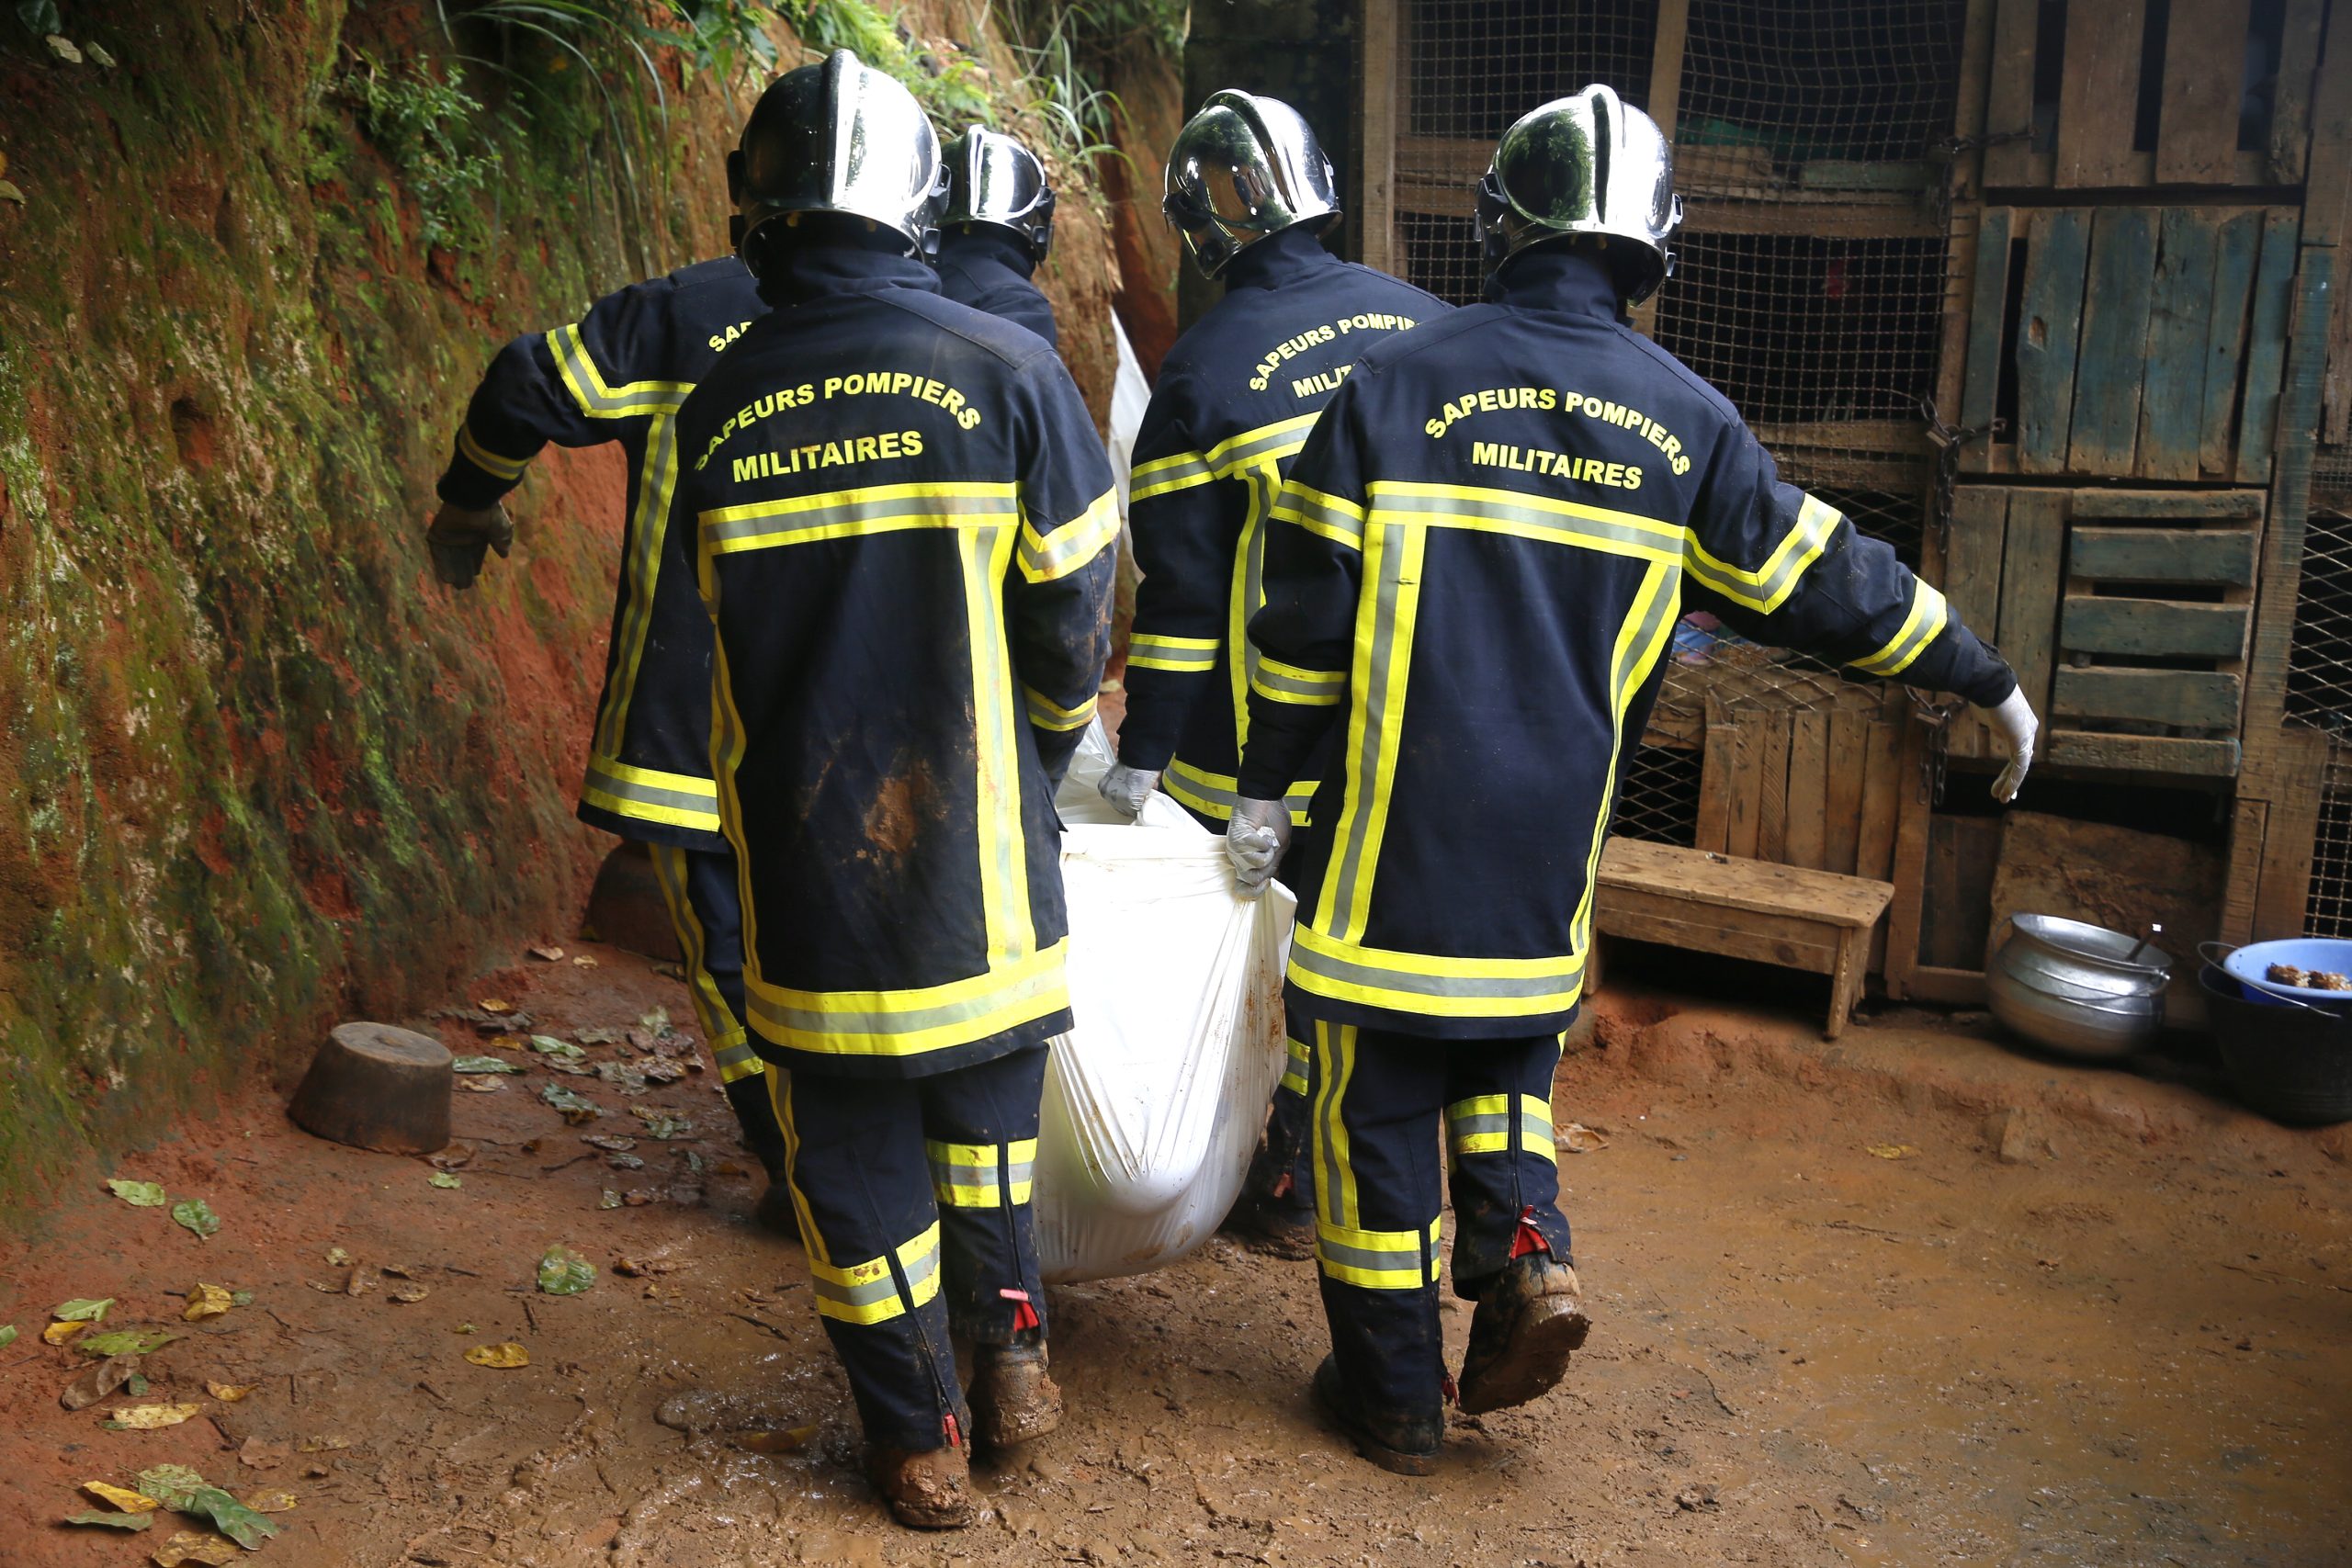 epa10016463 Rescue workers from Ivory Coast remove a body after a landslide in Attecoube, Ivory Coast, 16 June 2022. During the night of 15 to 16 June, rain fell in several districts of the city of Abidjan and the suburbs. According to a provisional report announced by military firefighters, there are 7 victims, including 5 dead and 2 injured.  EPA/LEGNAN KOULA